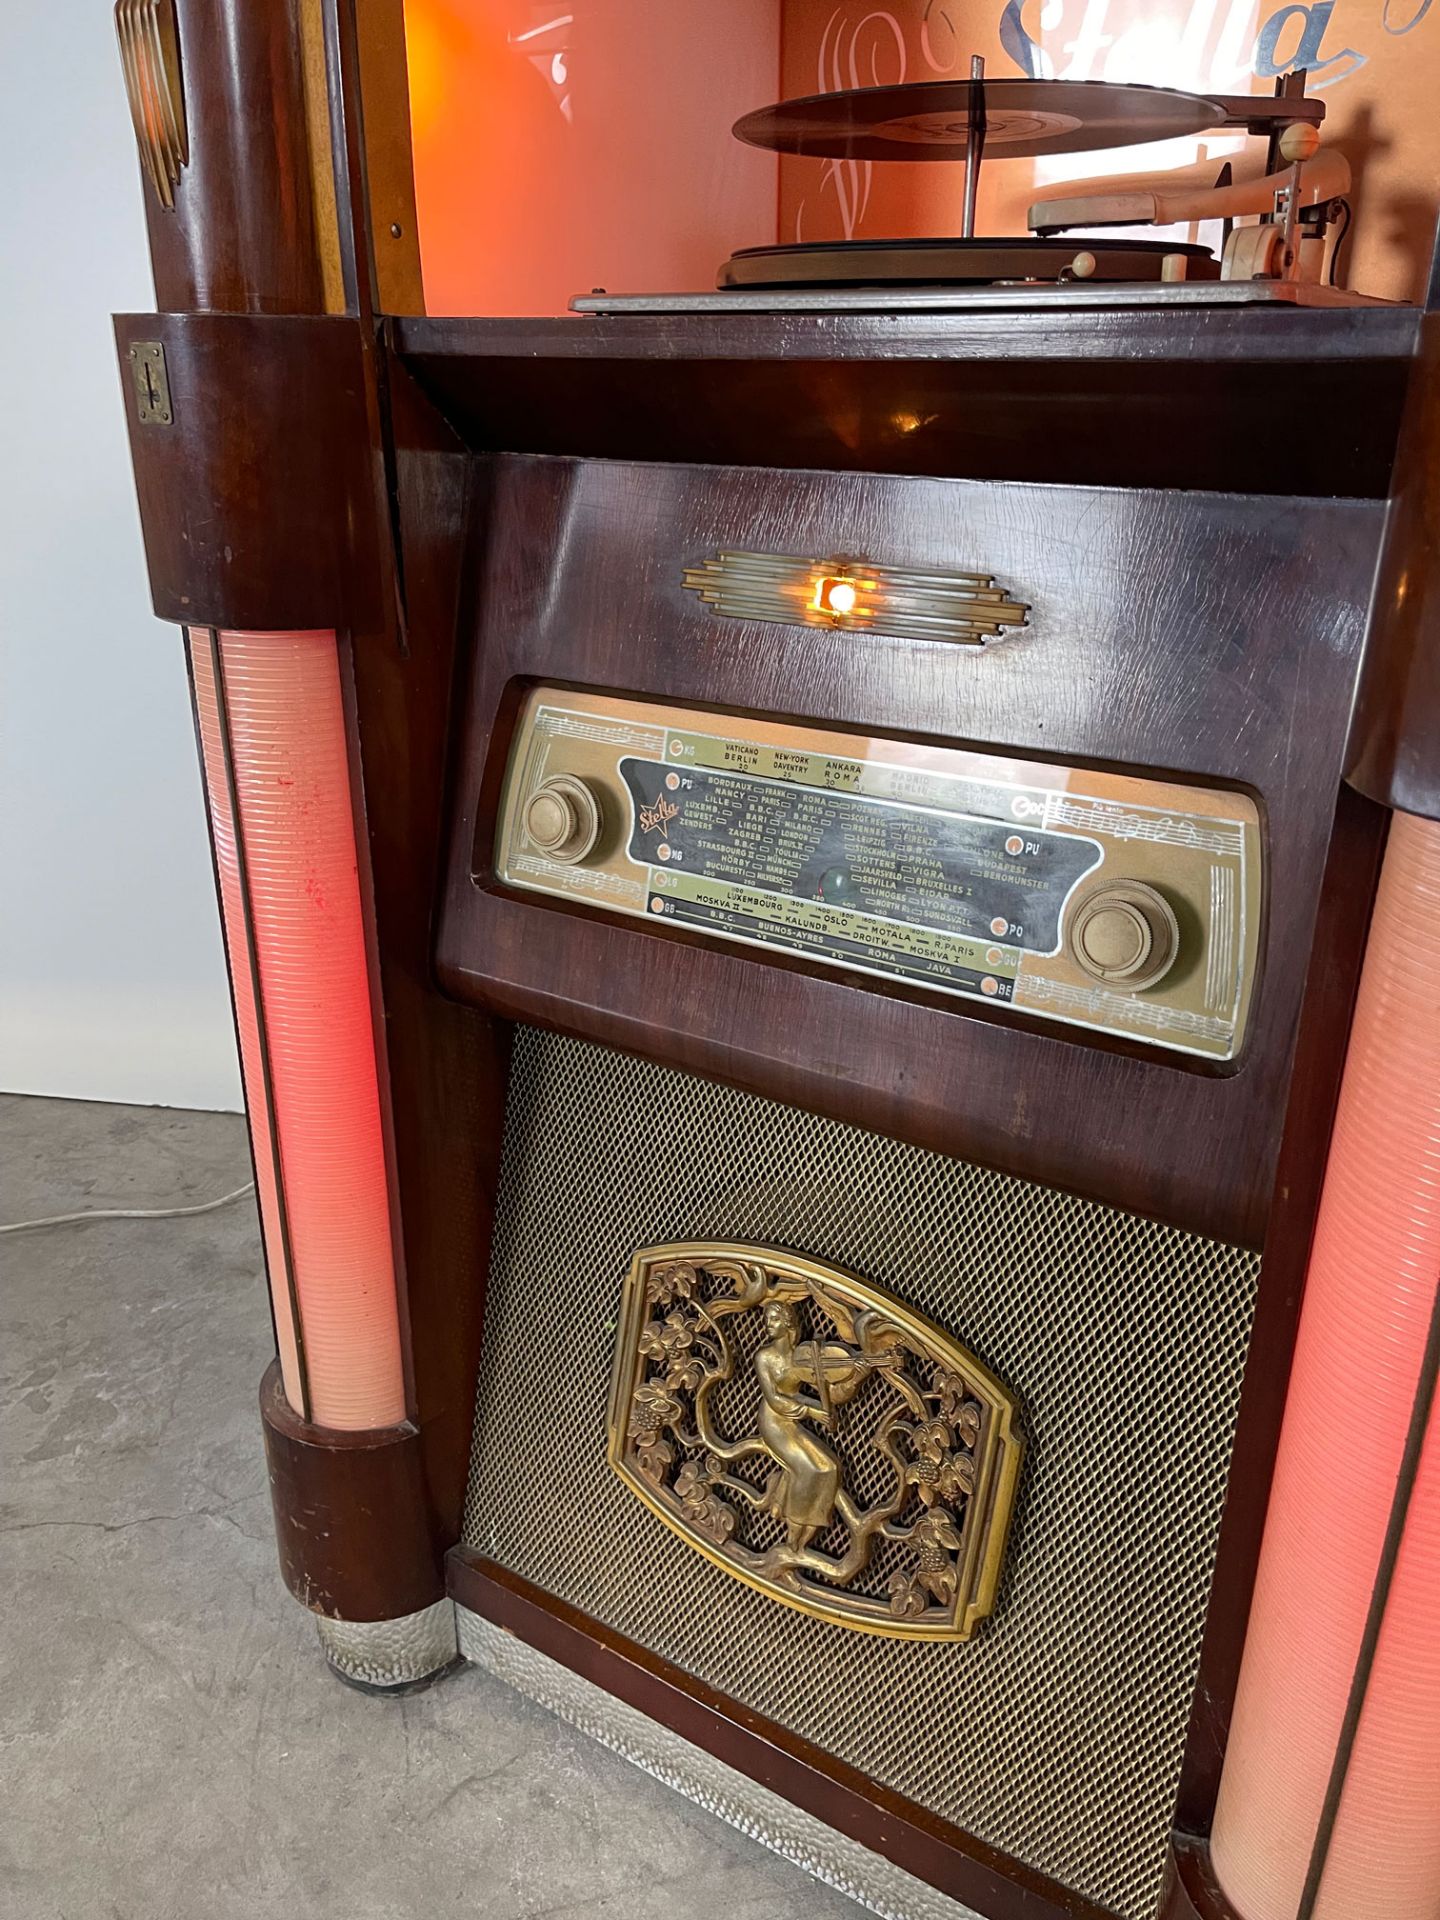 1954 Belgian Stella 531 Coin-Op Record Player with Built-In Radio - Image 10 of 15